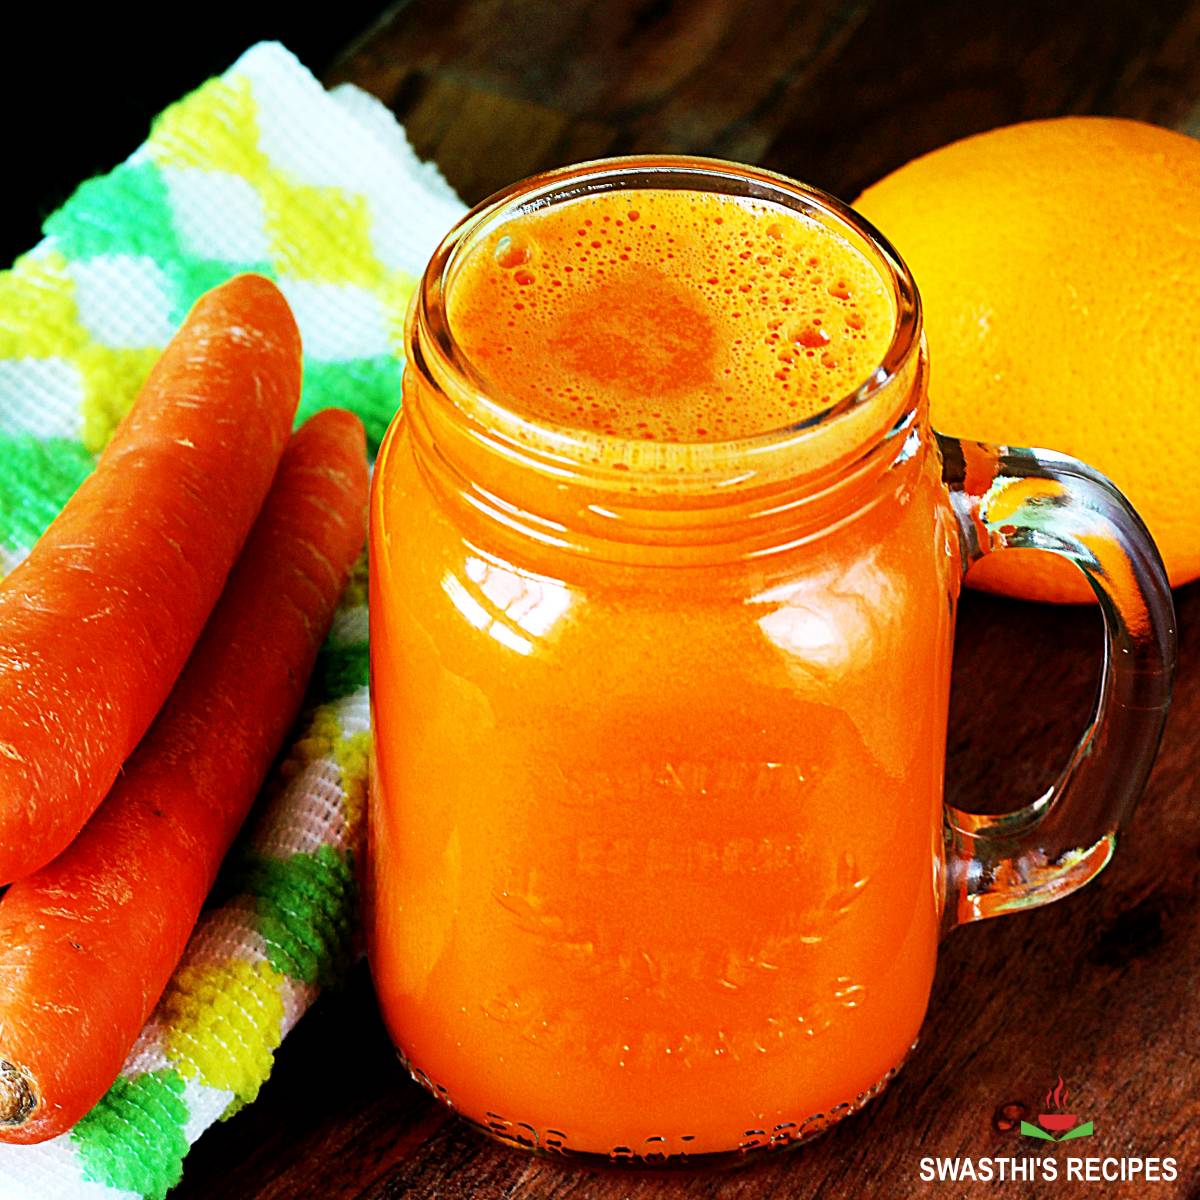 Carrot Juice Recipe with Blender & Juicer - Swasthi's Recipes